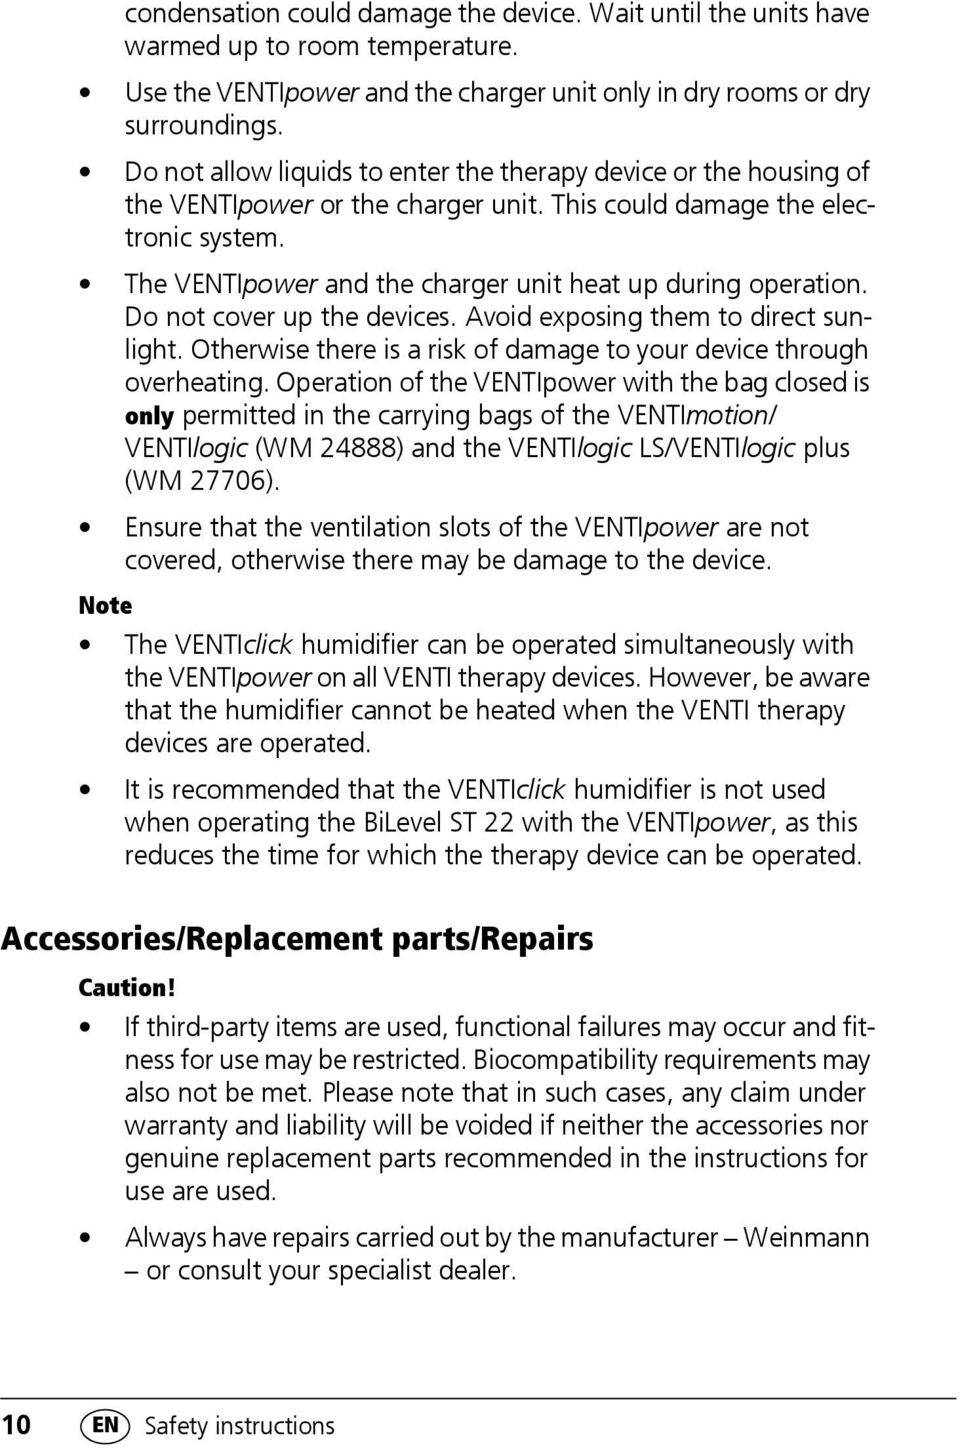 The VENTIpower and the charger unit heat up during operation. Do not cover up the devices. Avoid exposing them to direct sunlight.